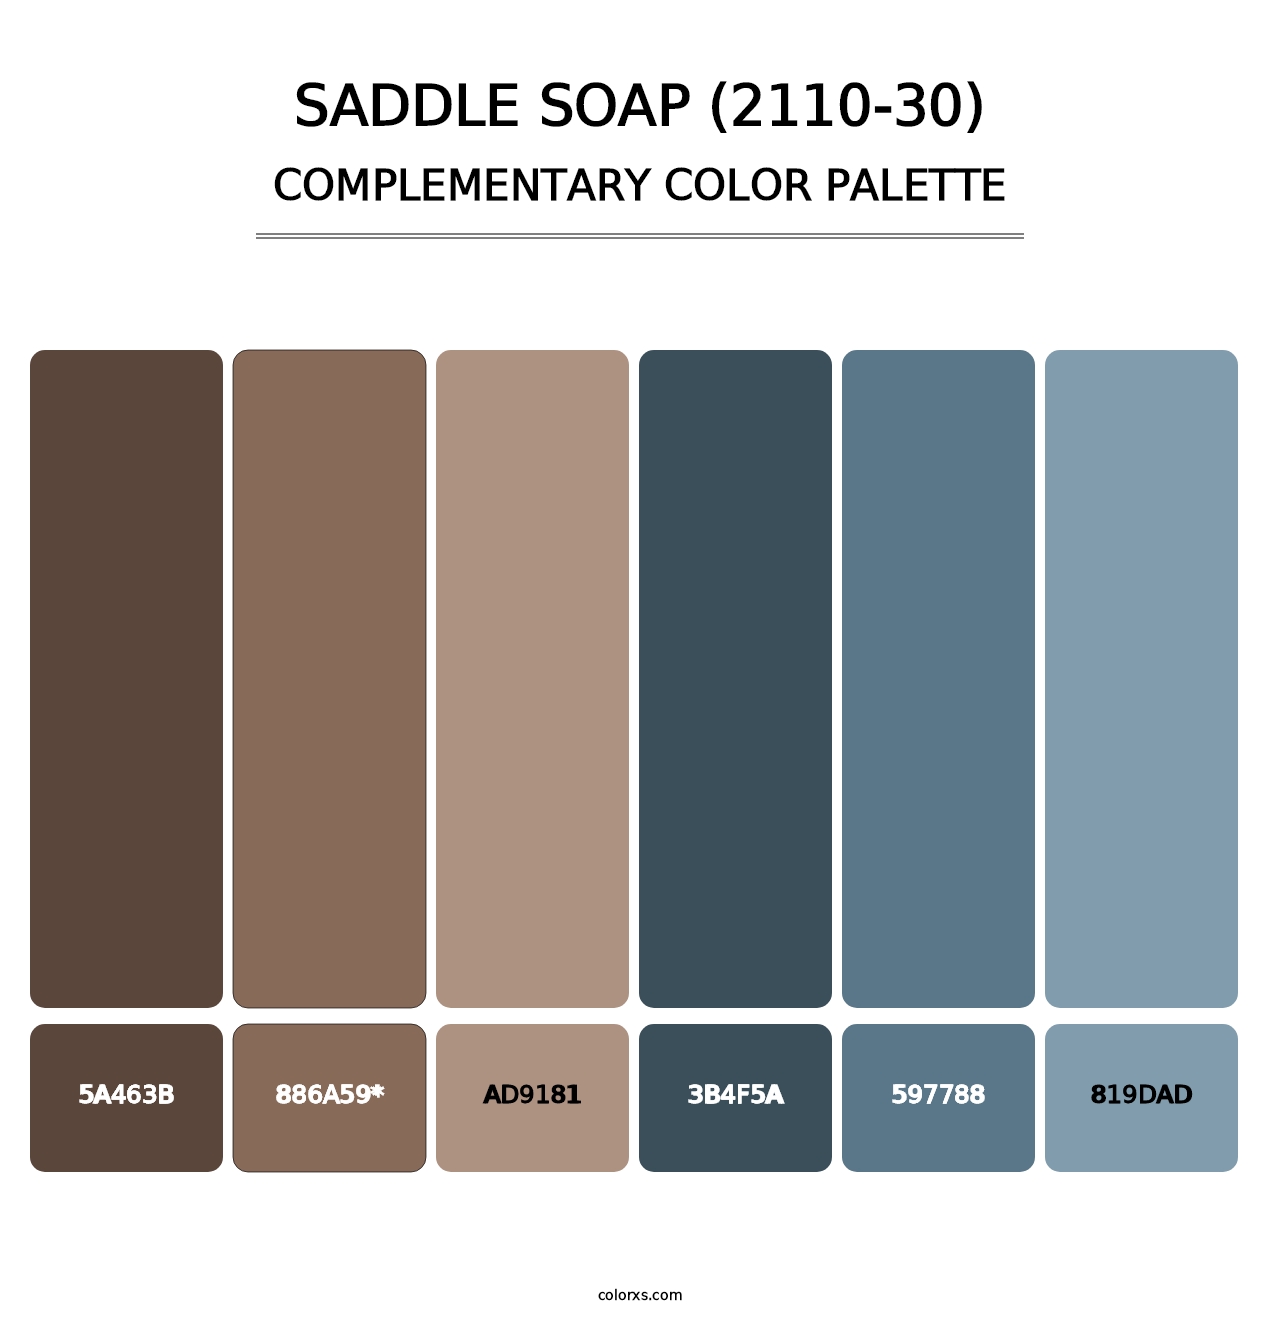 Saddle Soap (2110-30) - Complementary Color Palette